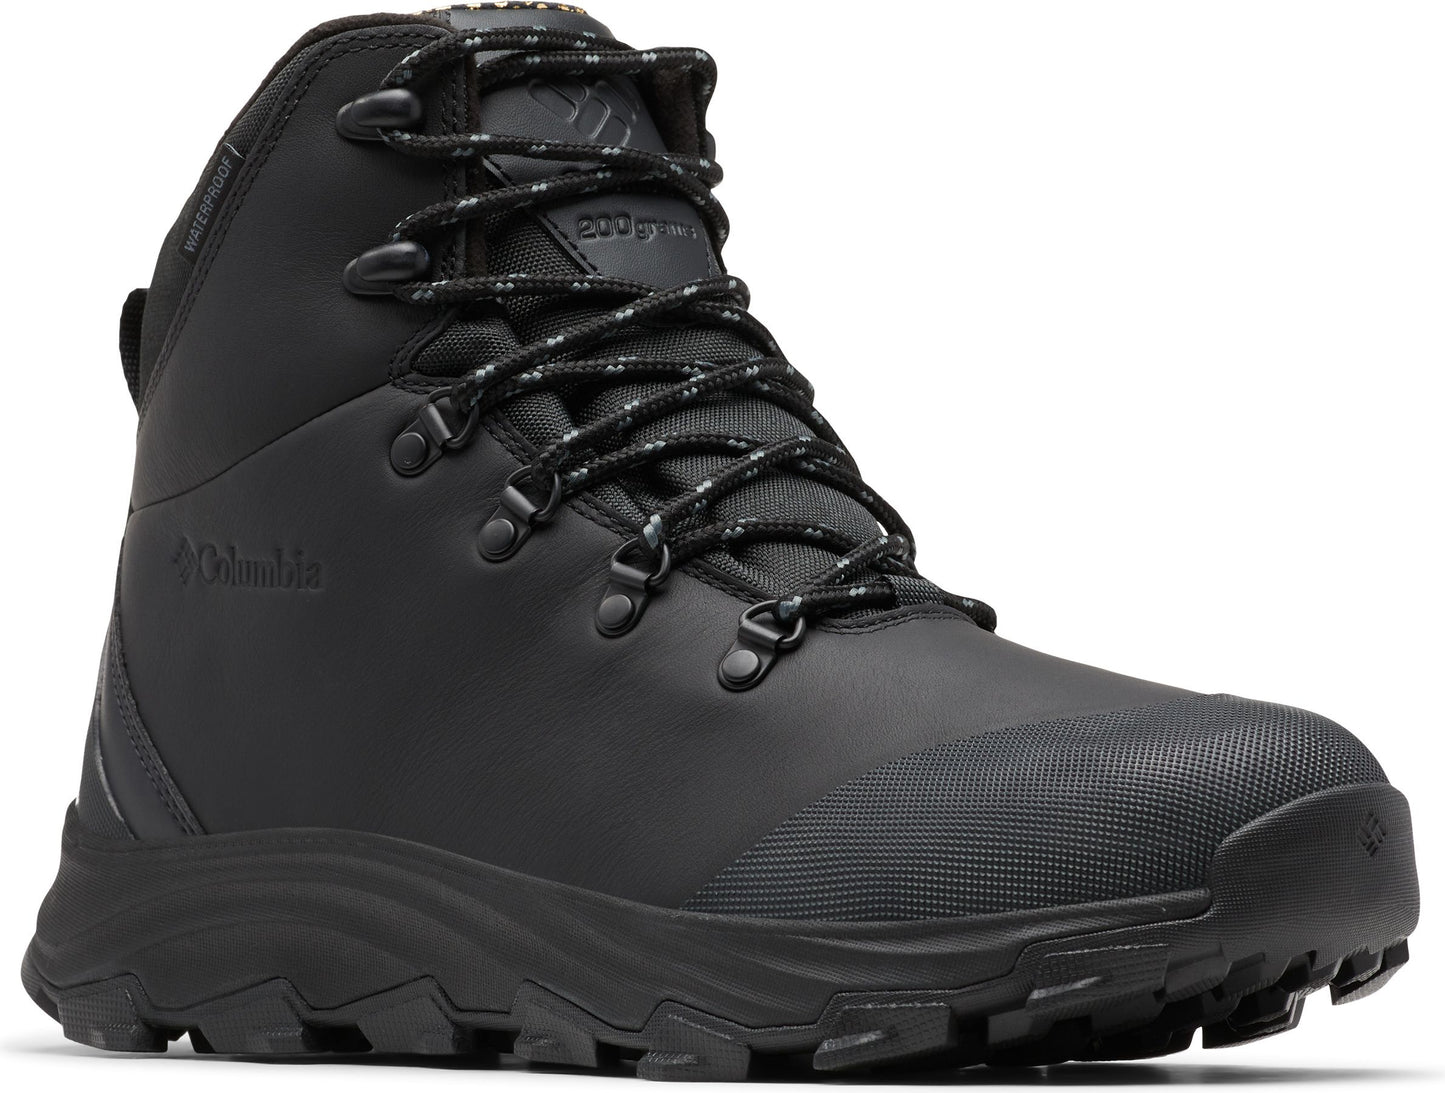 Columbia Boots Expeditionist Boot Black